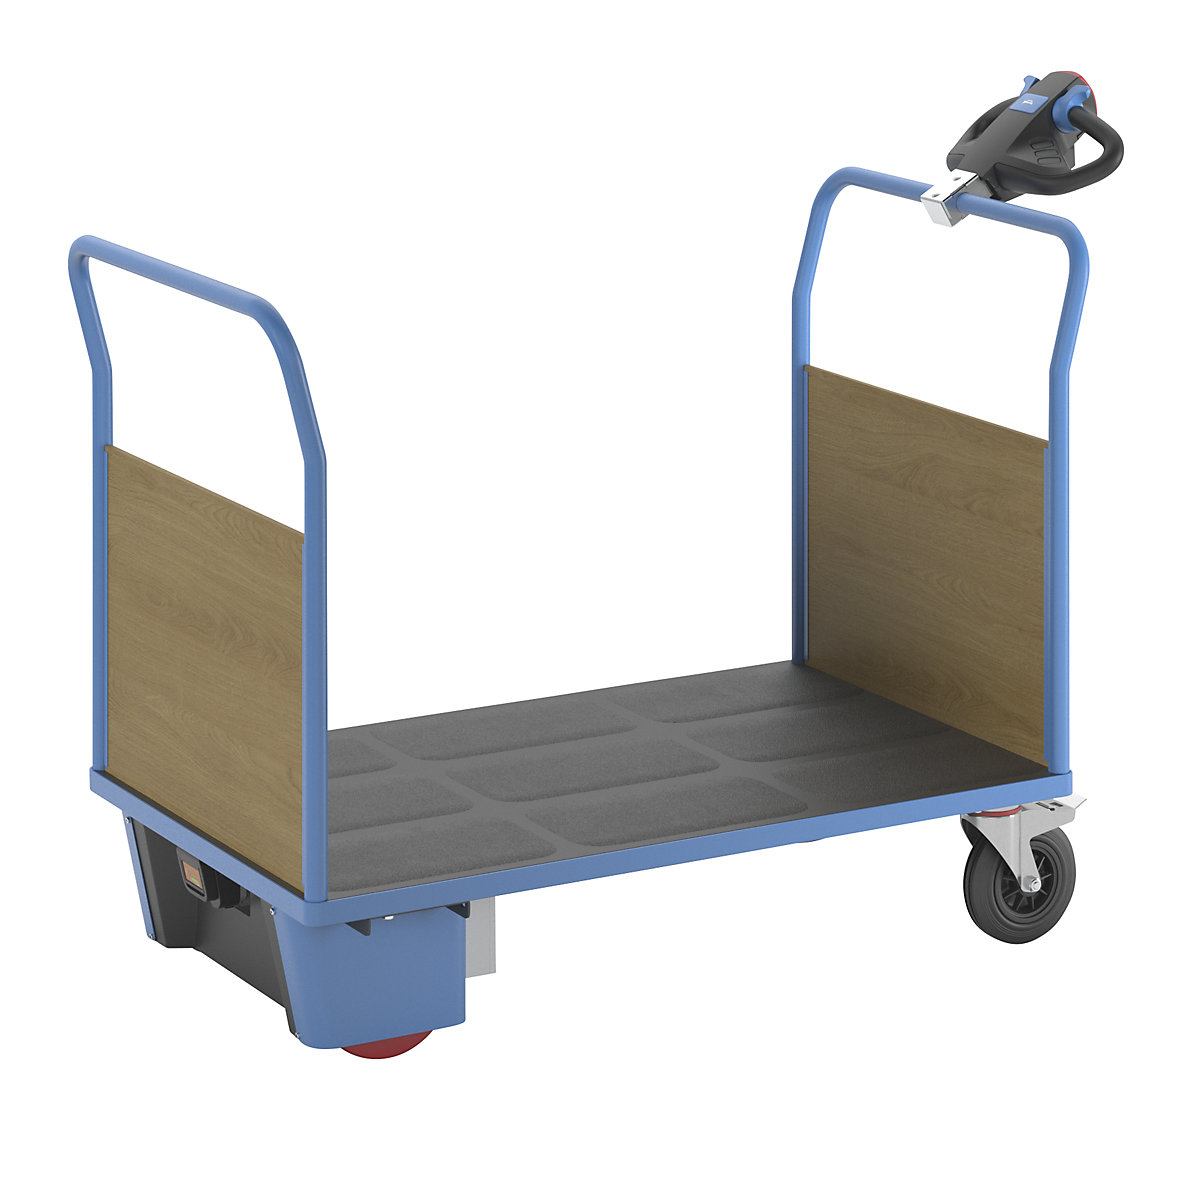 Platform truck with electric drive – eurokraft pro, 2 MDF end panels, LxWxH 1620 x 800 x 1300 mm-13